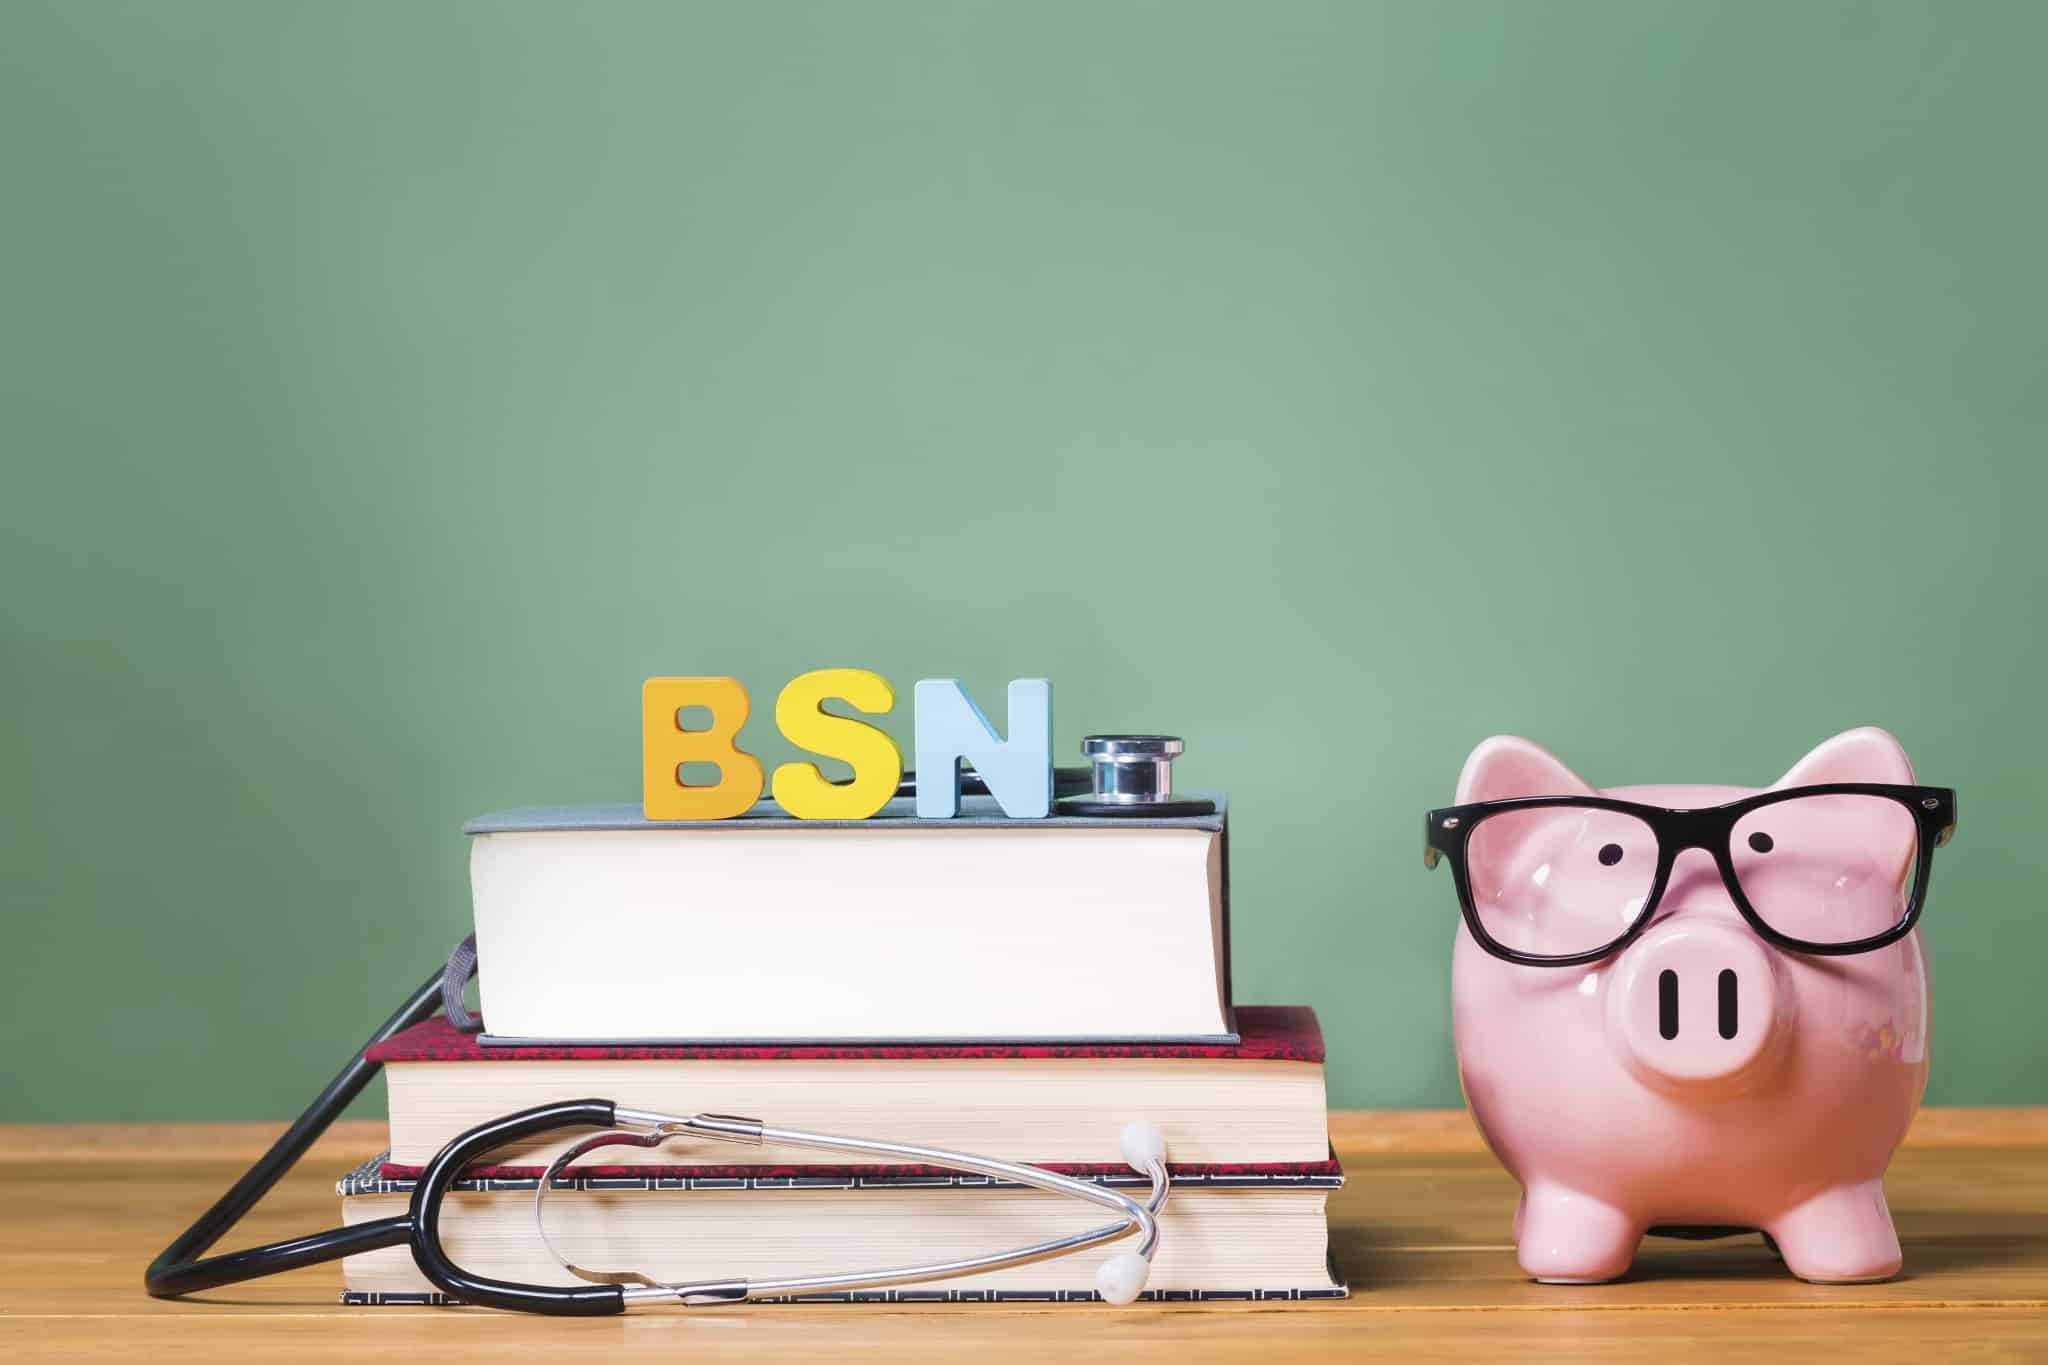 BSN sign on a stack of books with a stethoscope